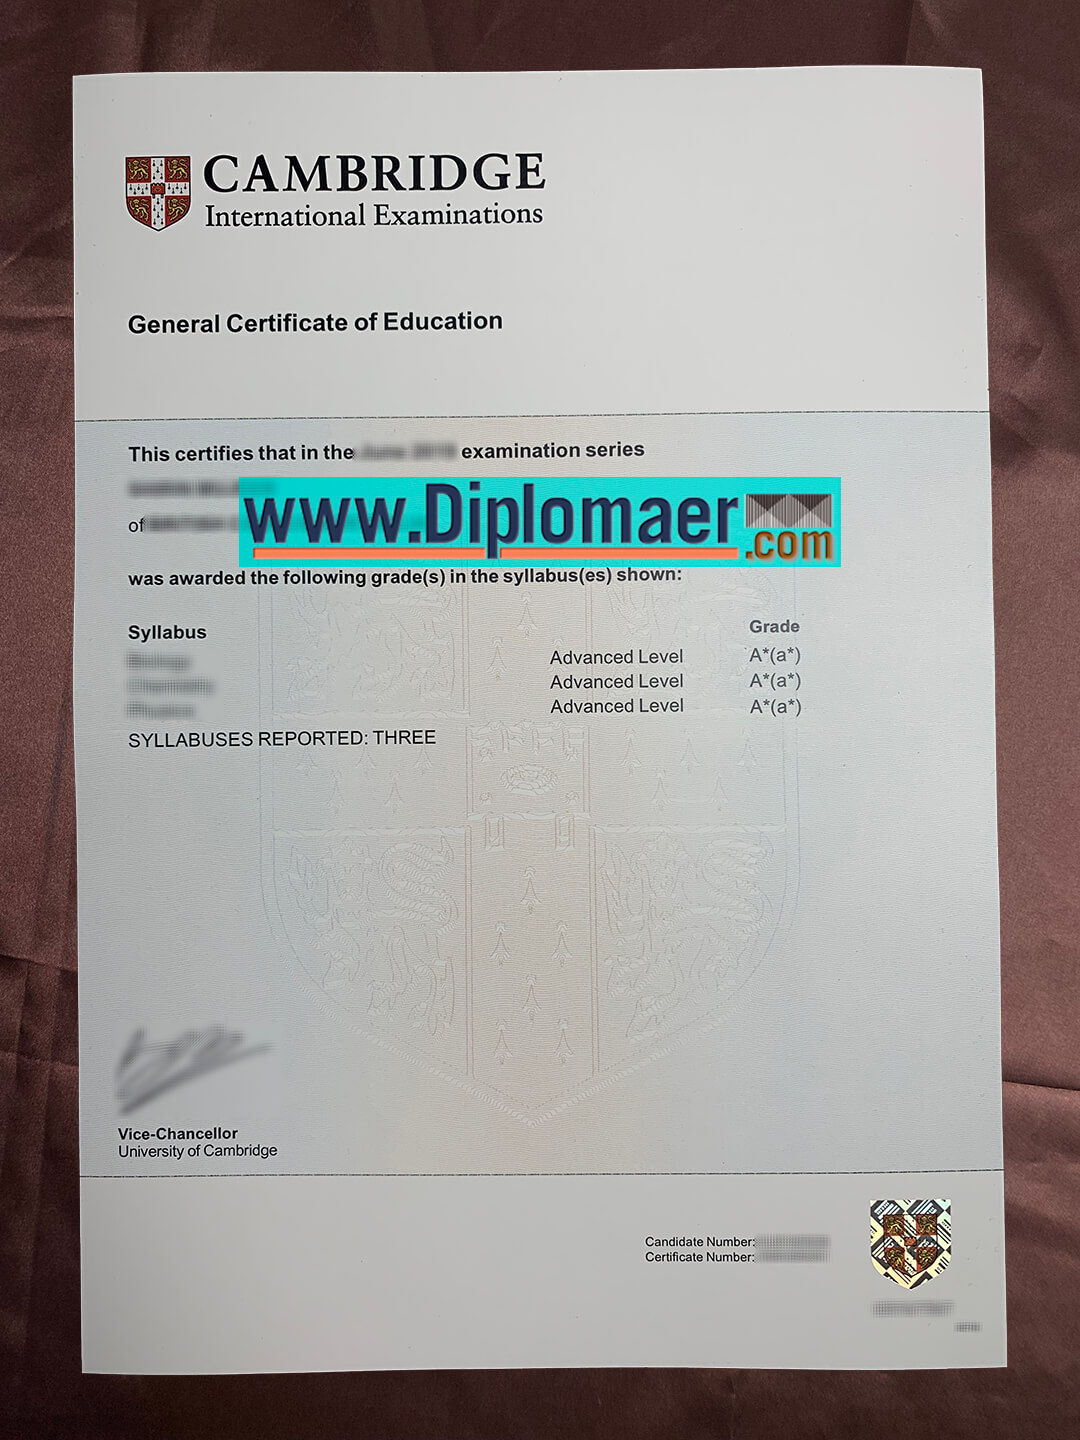 Cambridge GCE A level fake diploma - Best site provide the GCE A-Level certificates